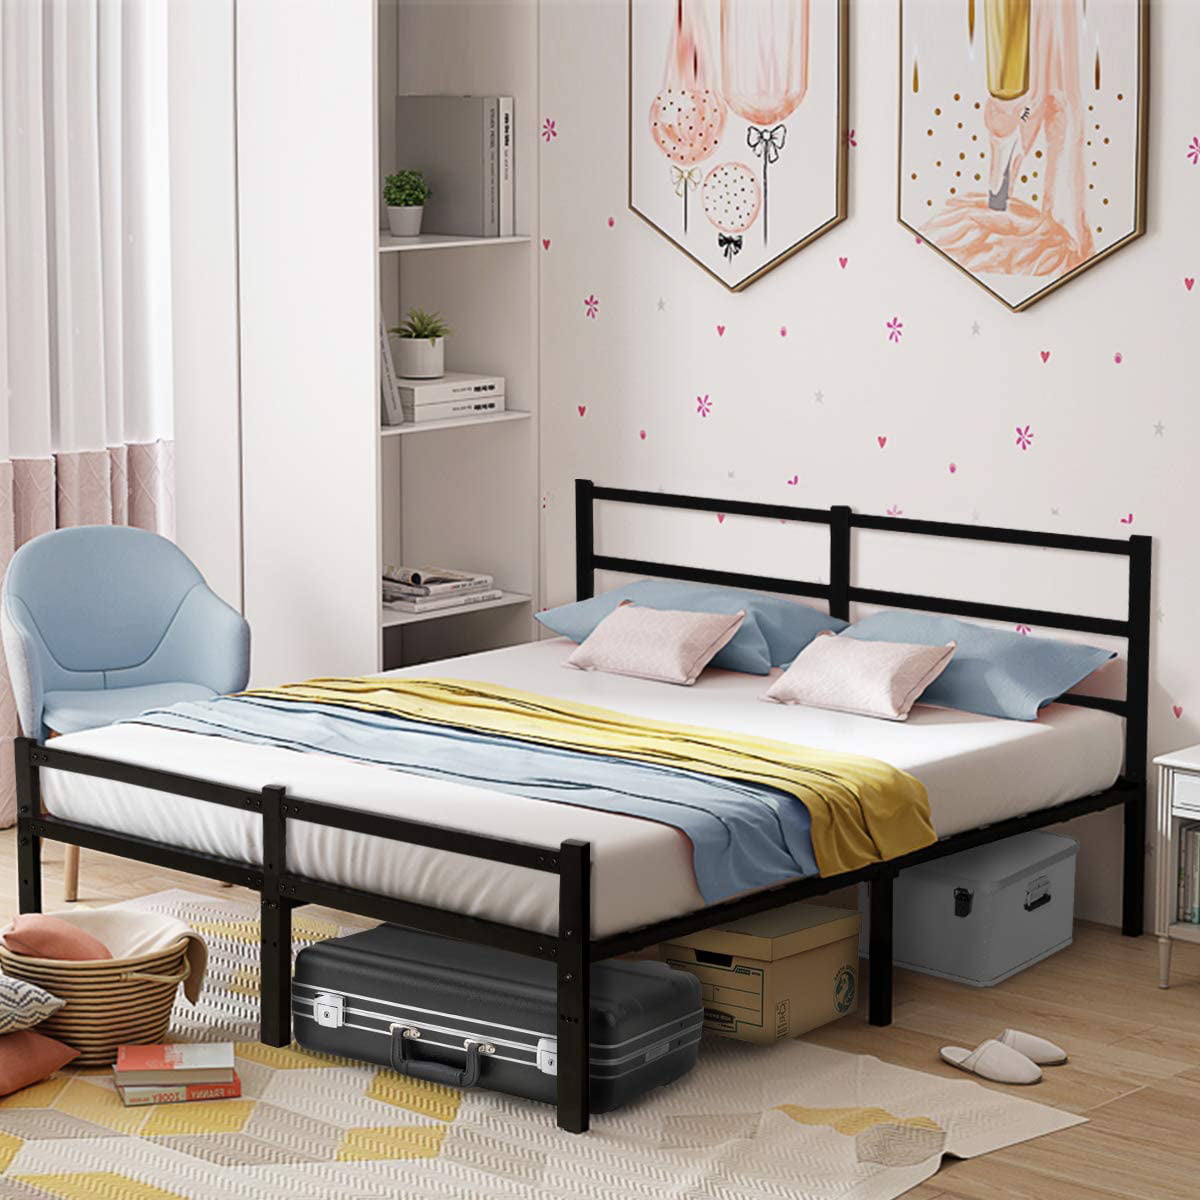 Queen Bed Frames With Headboard Black, Storage Bed Frame Without Headboard